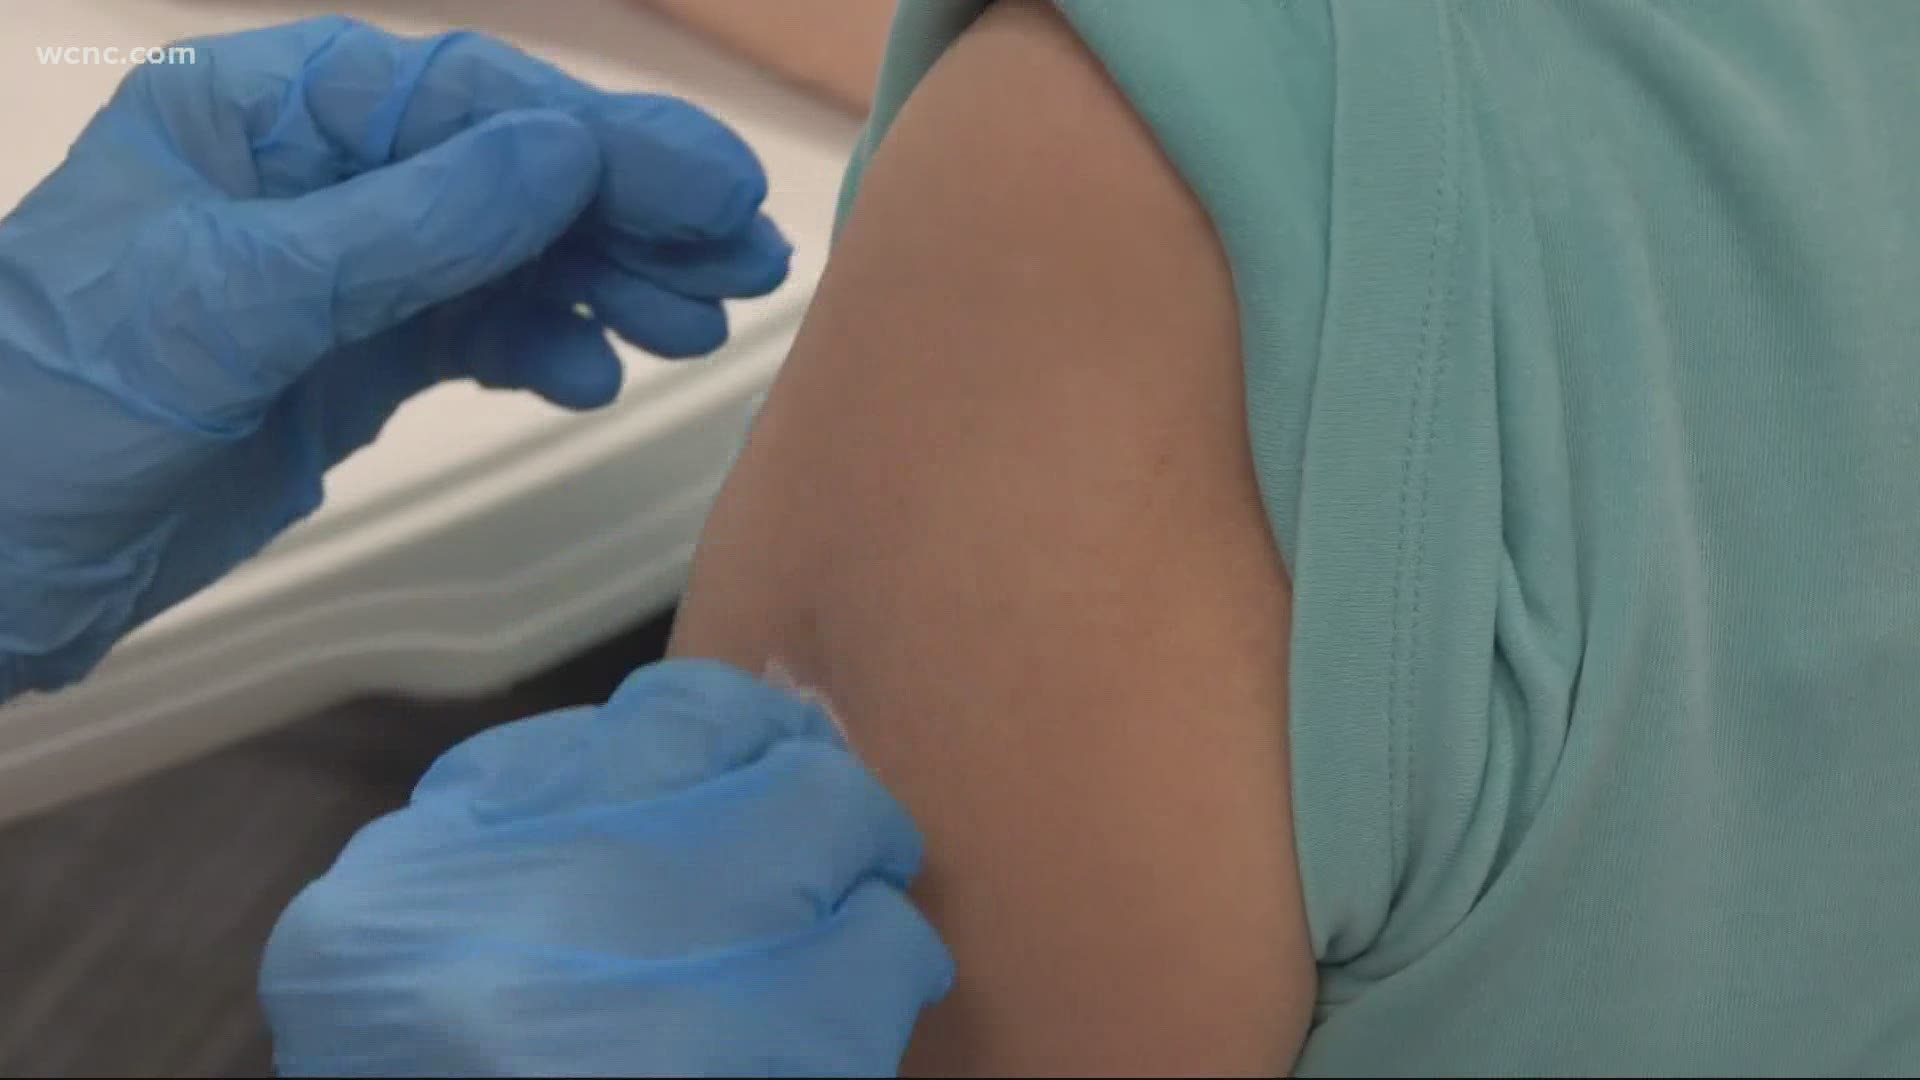 Counties and hospital systems across North Carolina are working to vaccinate as many people as possible, and as quickly as possible.